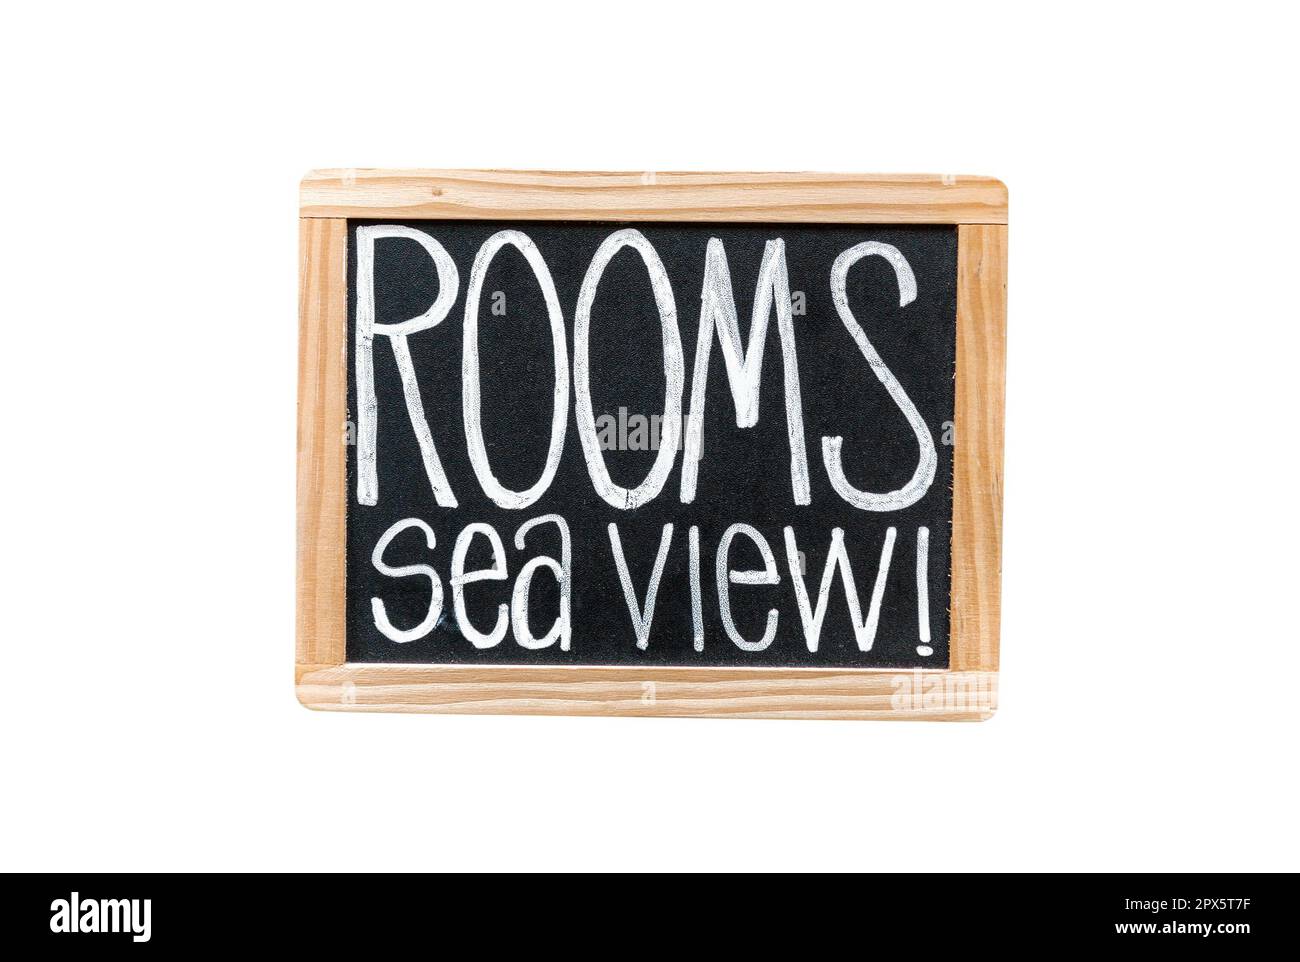 Hotel rooms available sea view chalkboard sign isolated, hostpitality business object Stock Photo